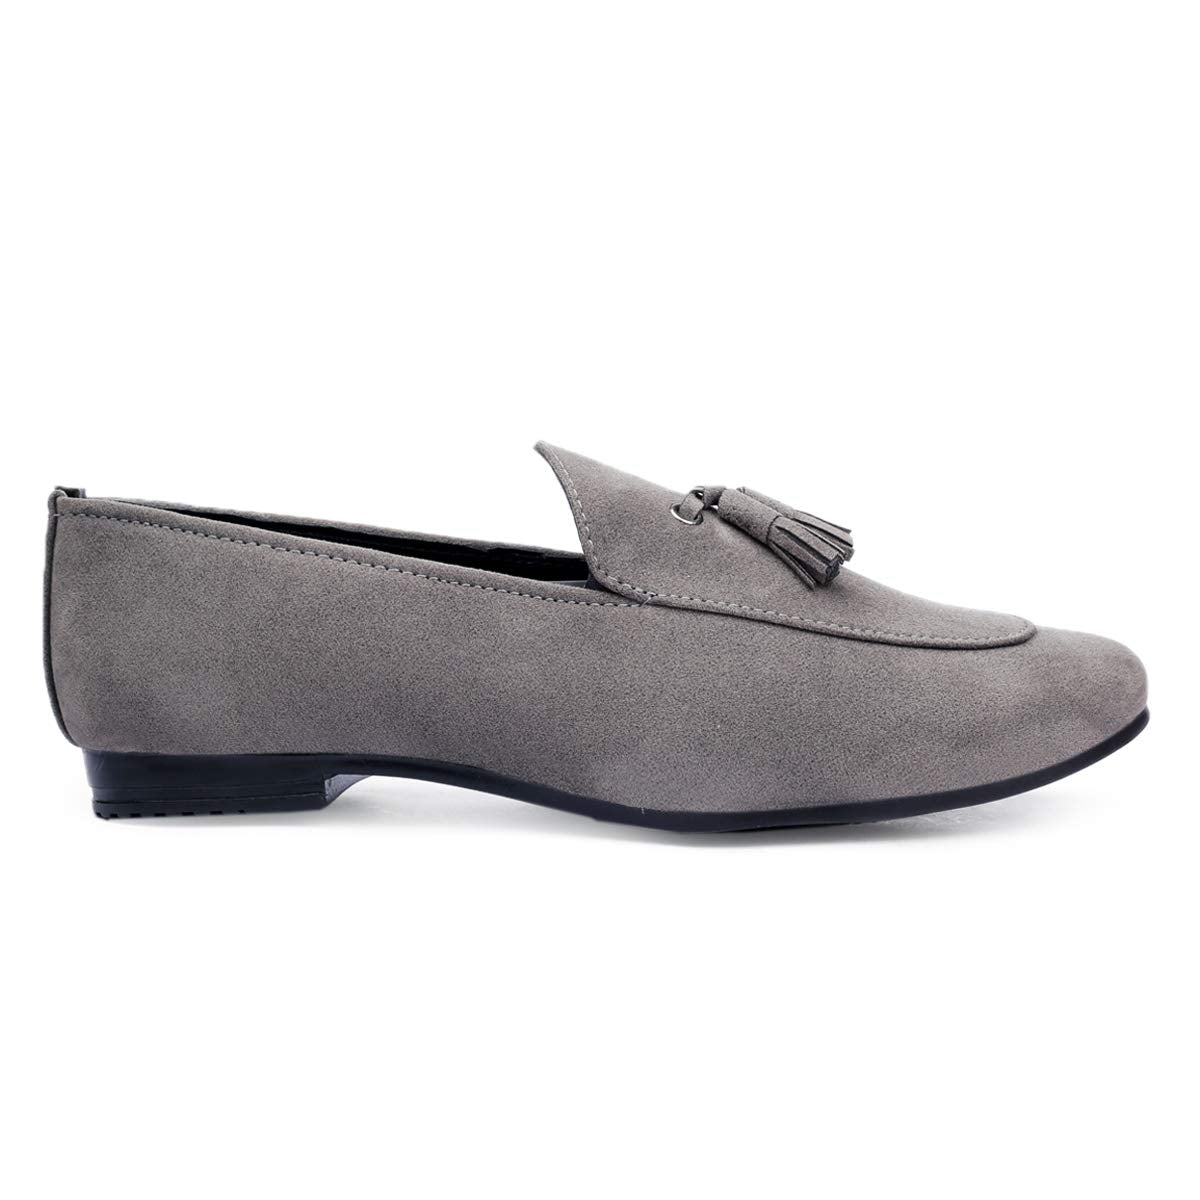 Basic Pattern Classic Casual Suede Material Loafer & Moccasins Shoe For Men-JonasParamount